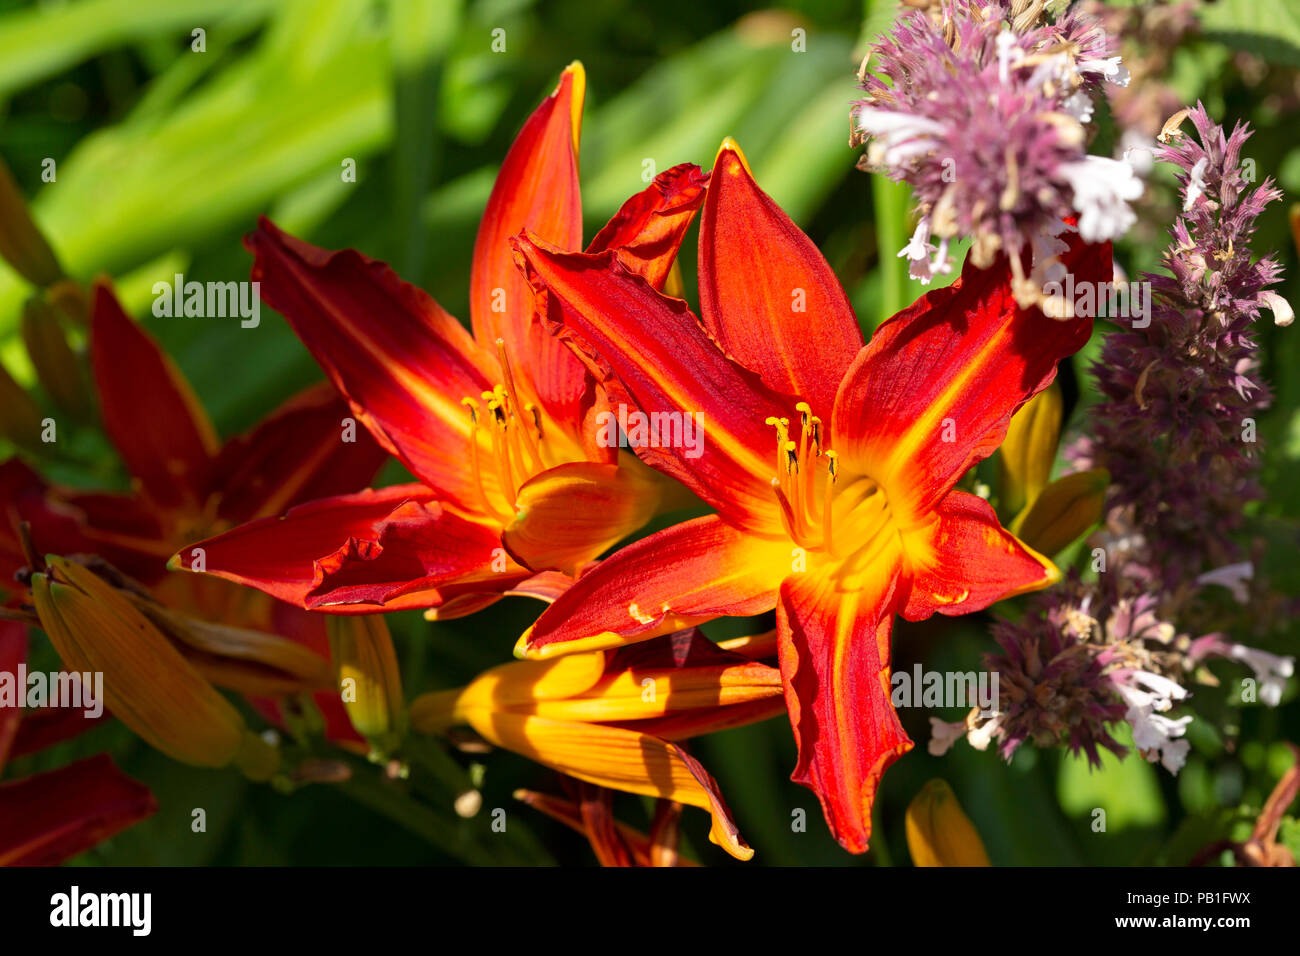 Hemerocallis American Revolution blooms on a summer day in Northumberland, England. The flower is a reblooming daylily. Stock Photo